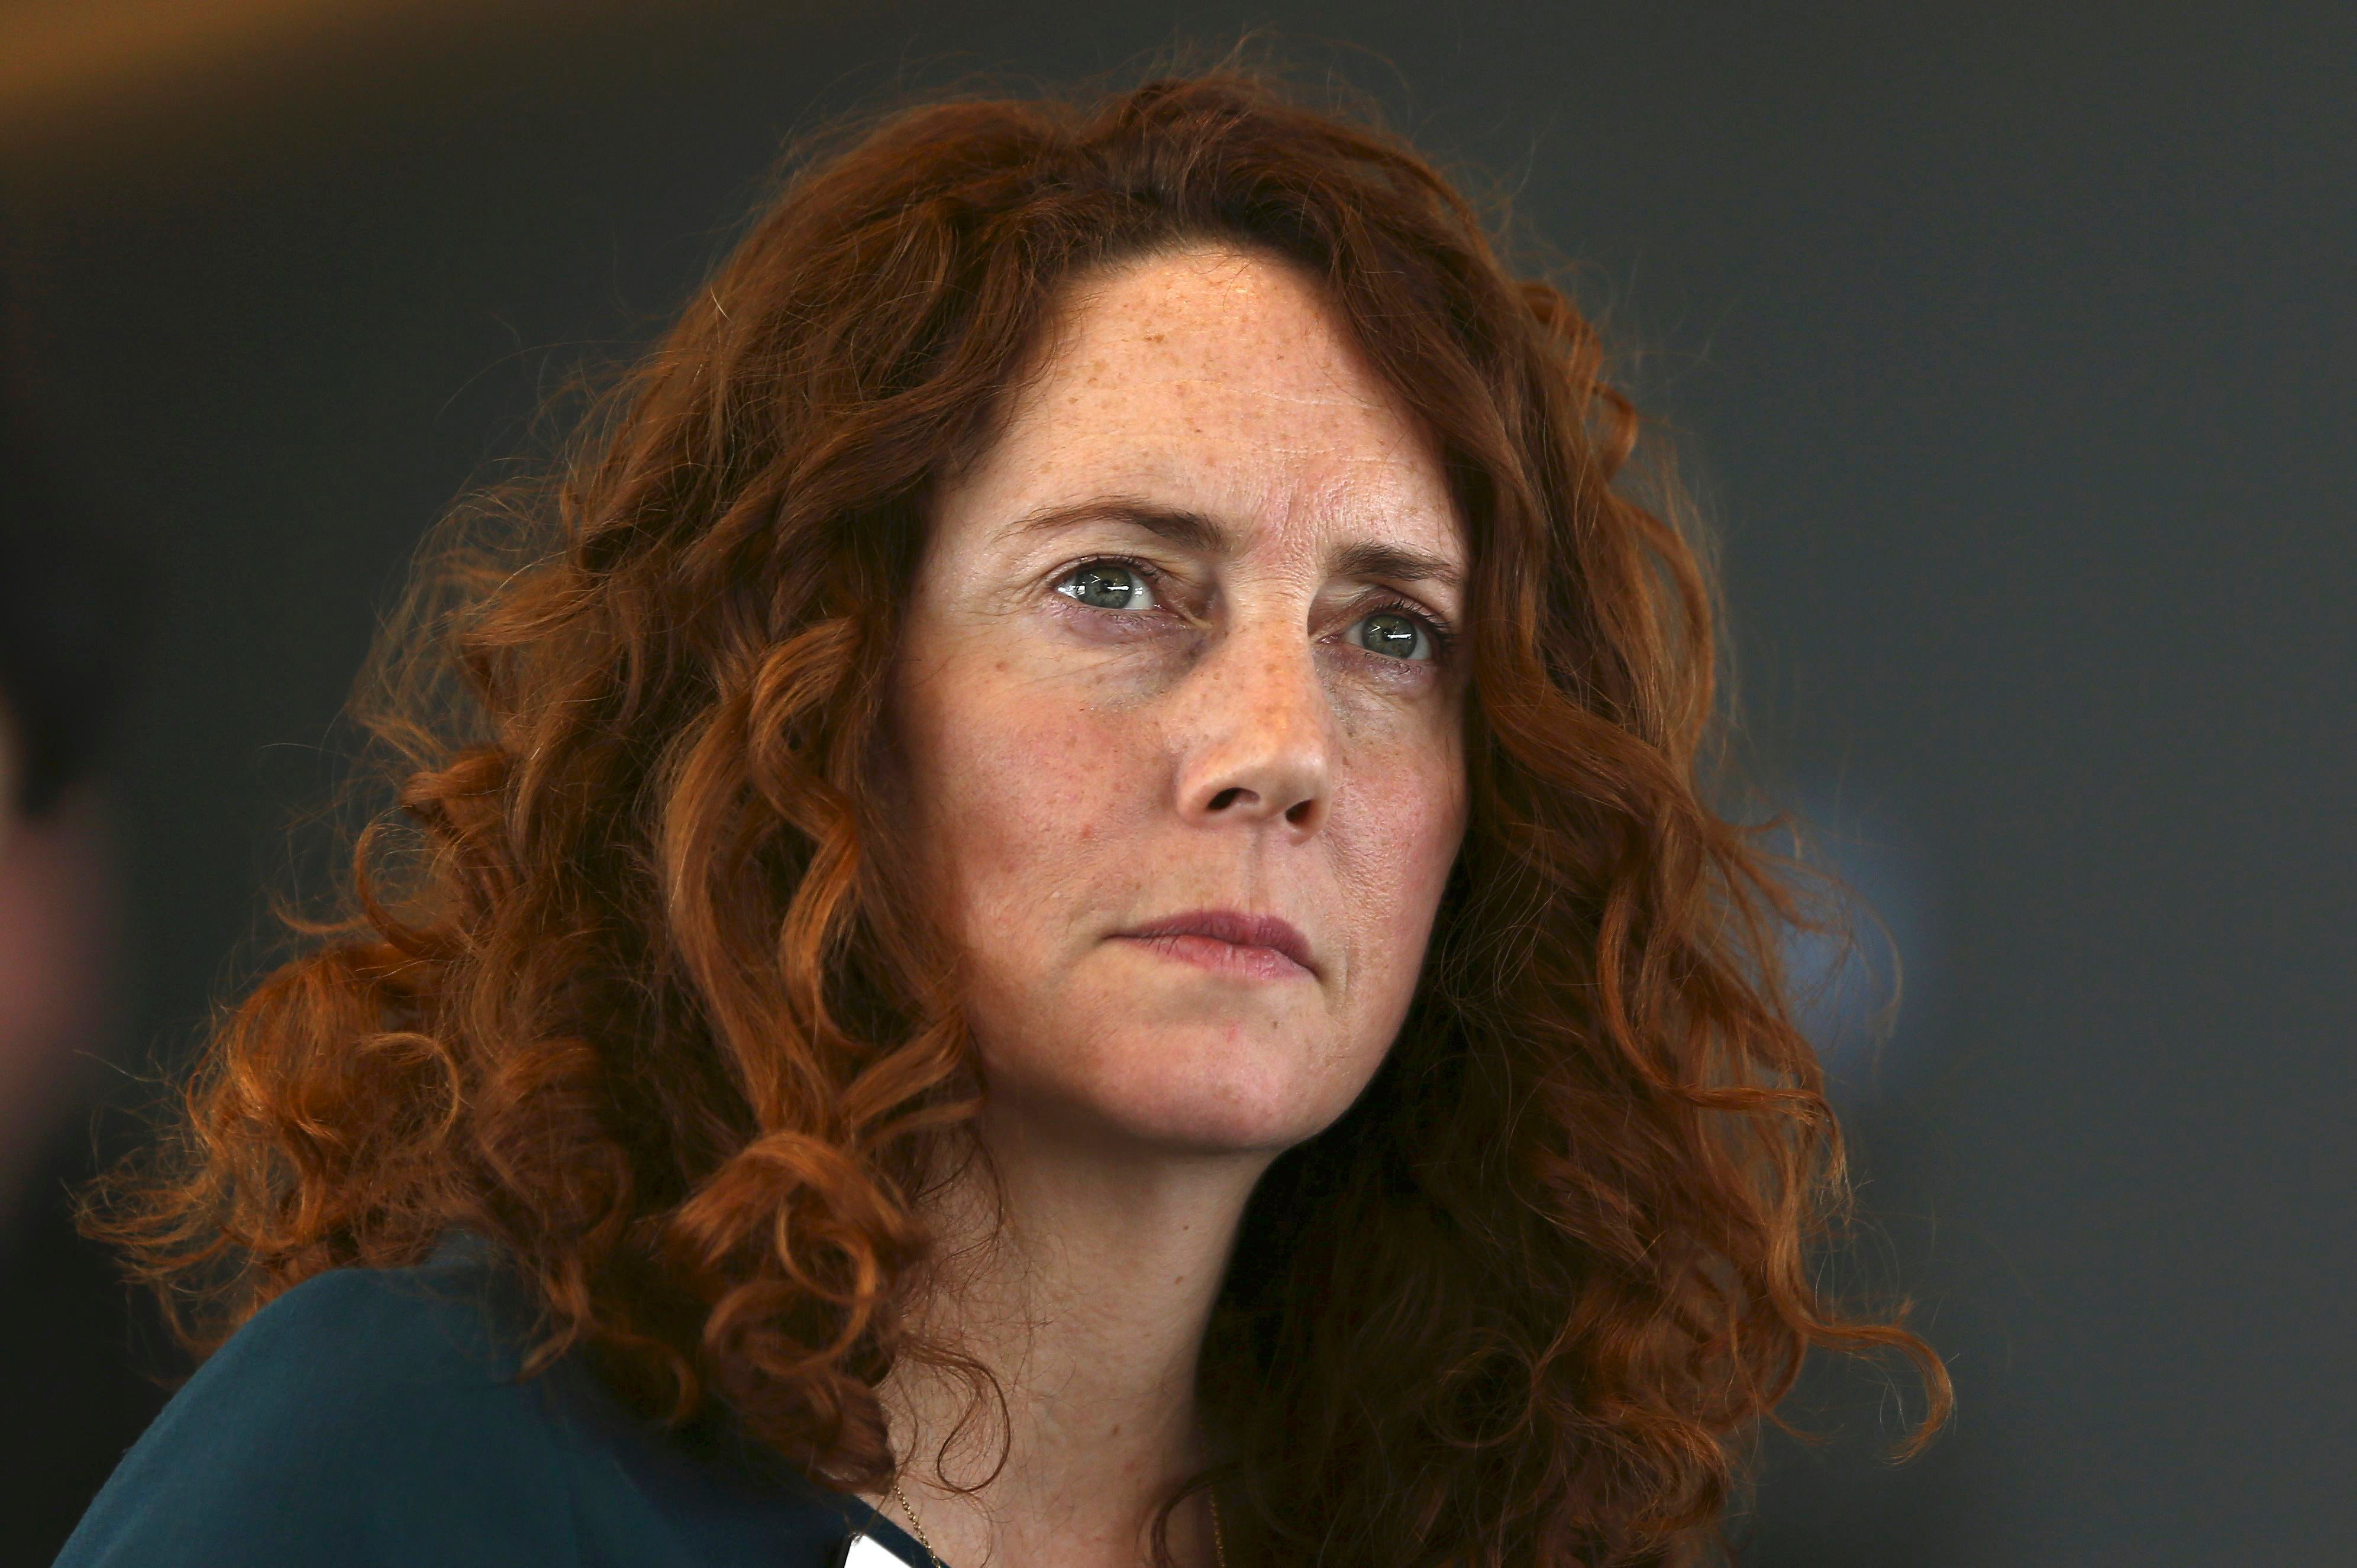 Rebekah Brooks has denied involvement in unlawful activity while editor of The Sun (PA)